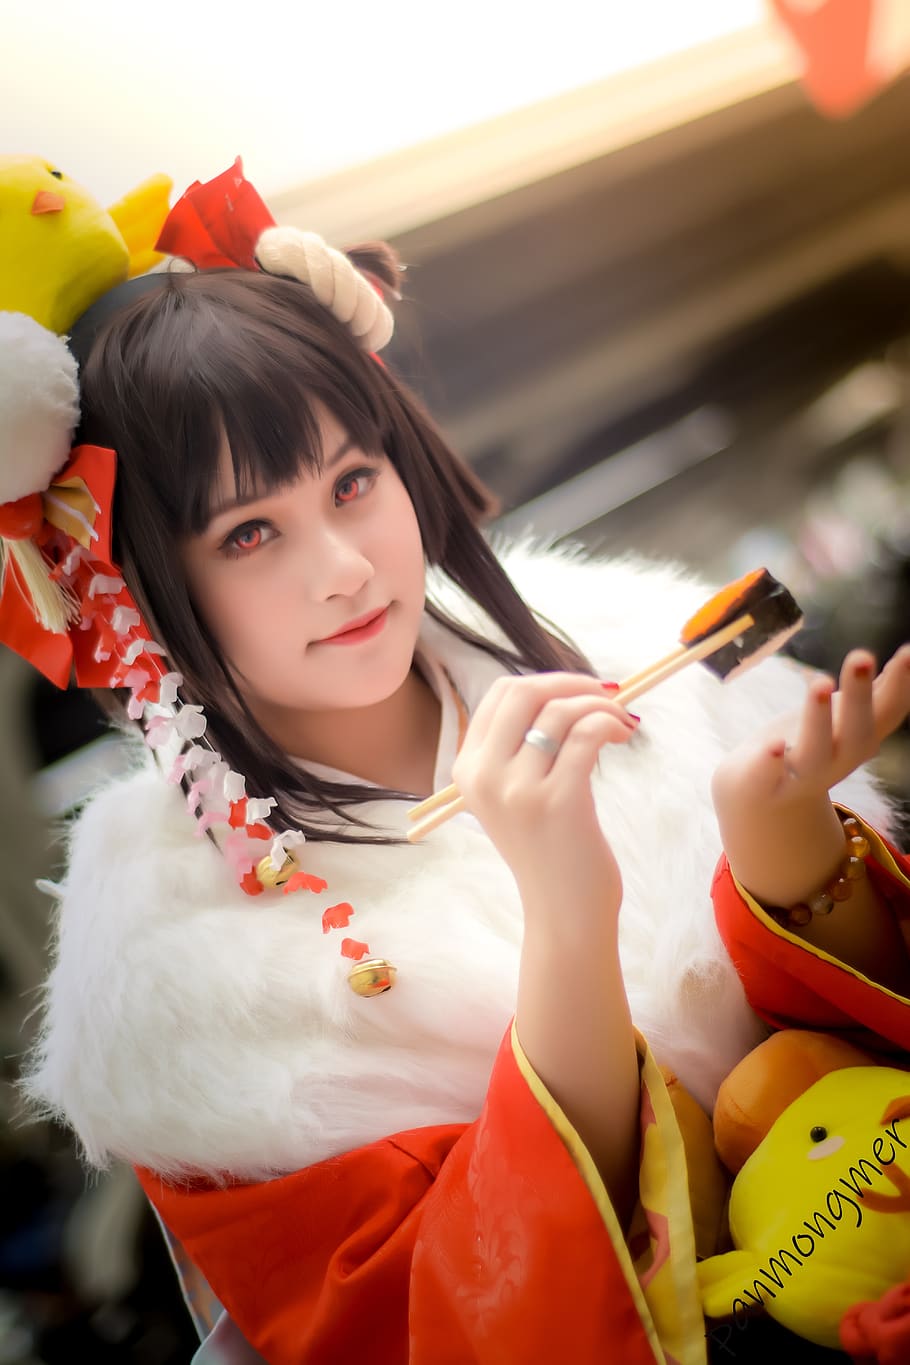 japan, onmyoji, cosplay, girl, cute, lovely, real people, lifestyles, women, young adult